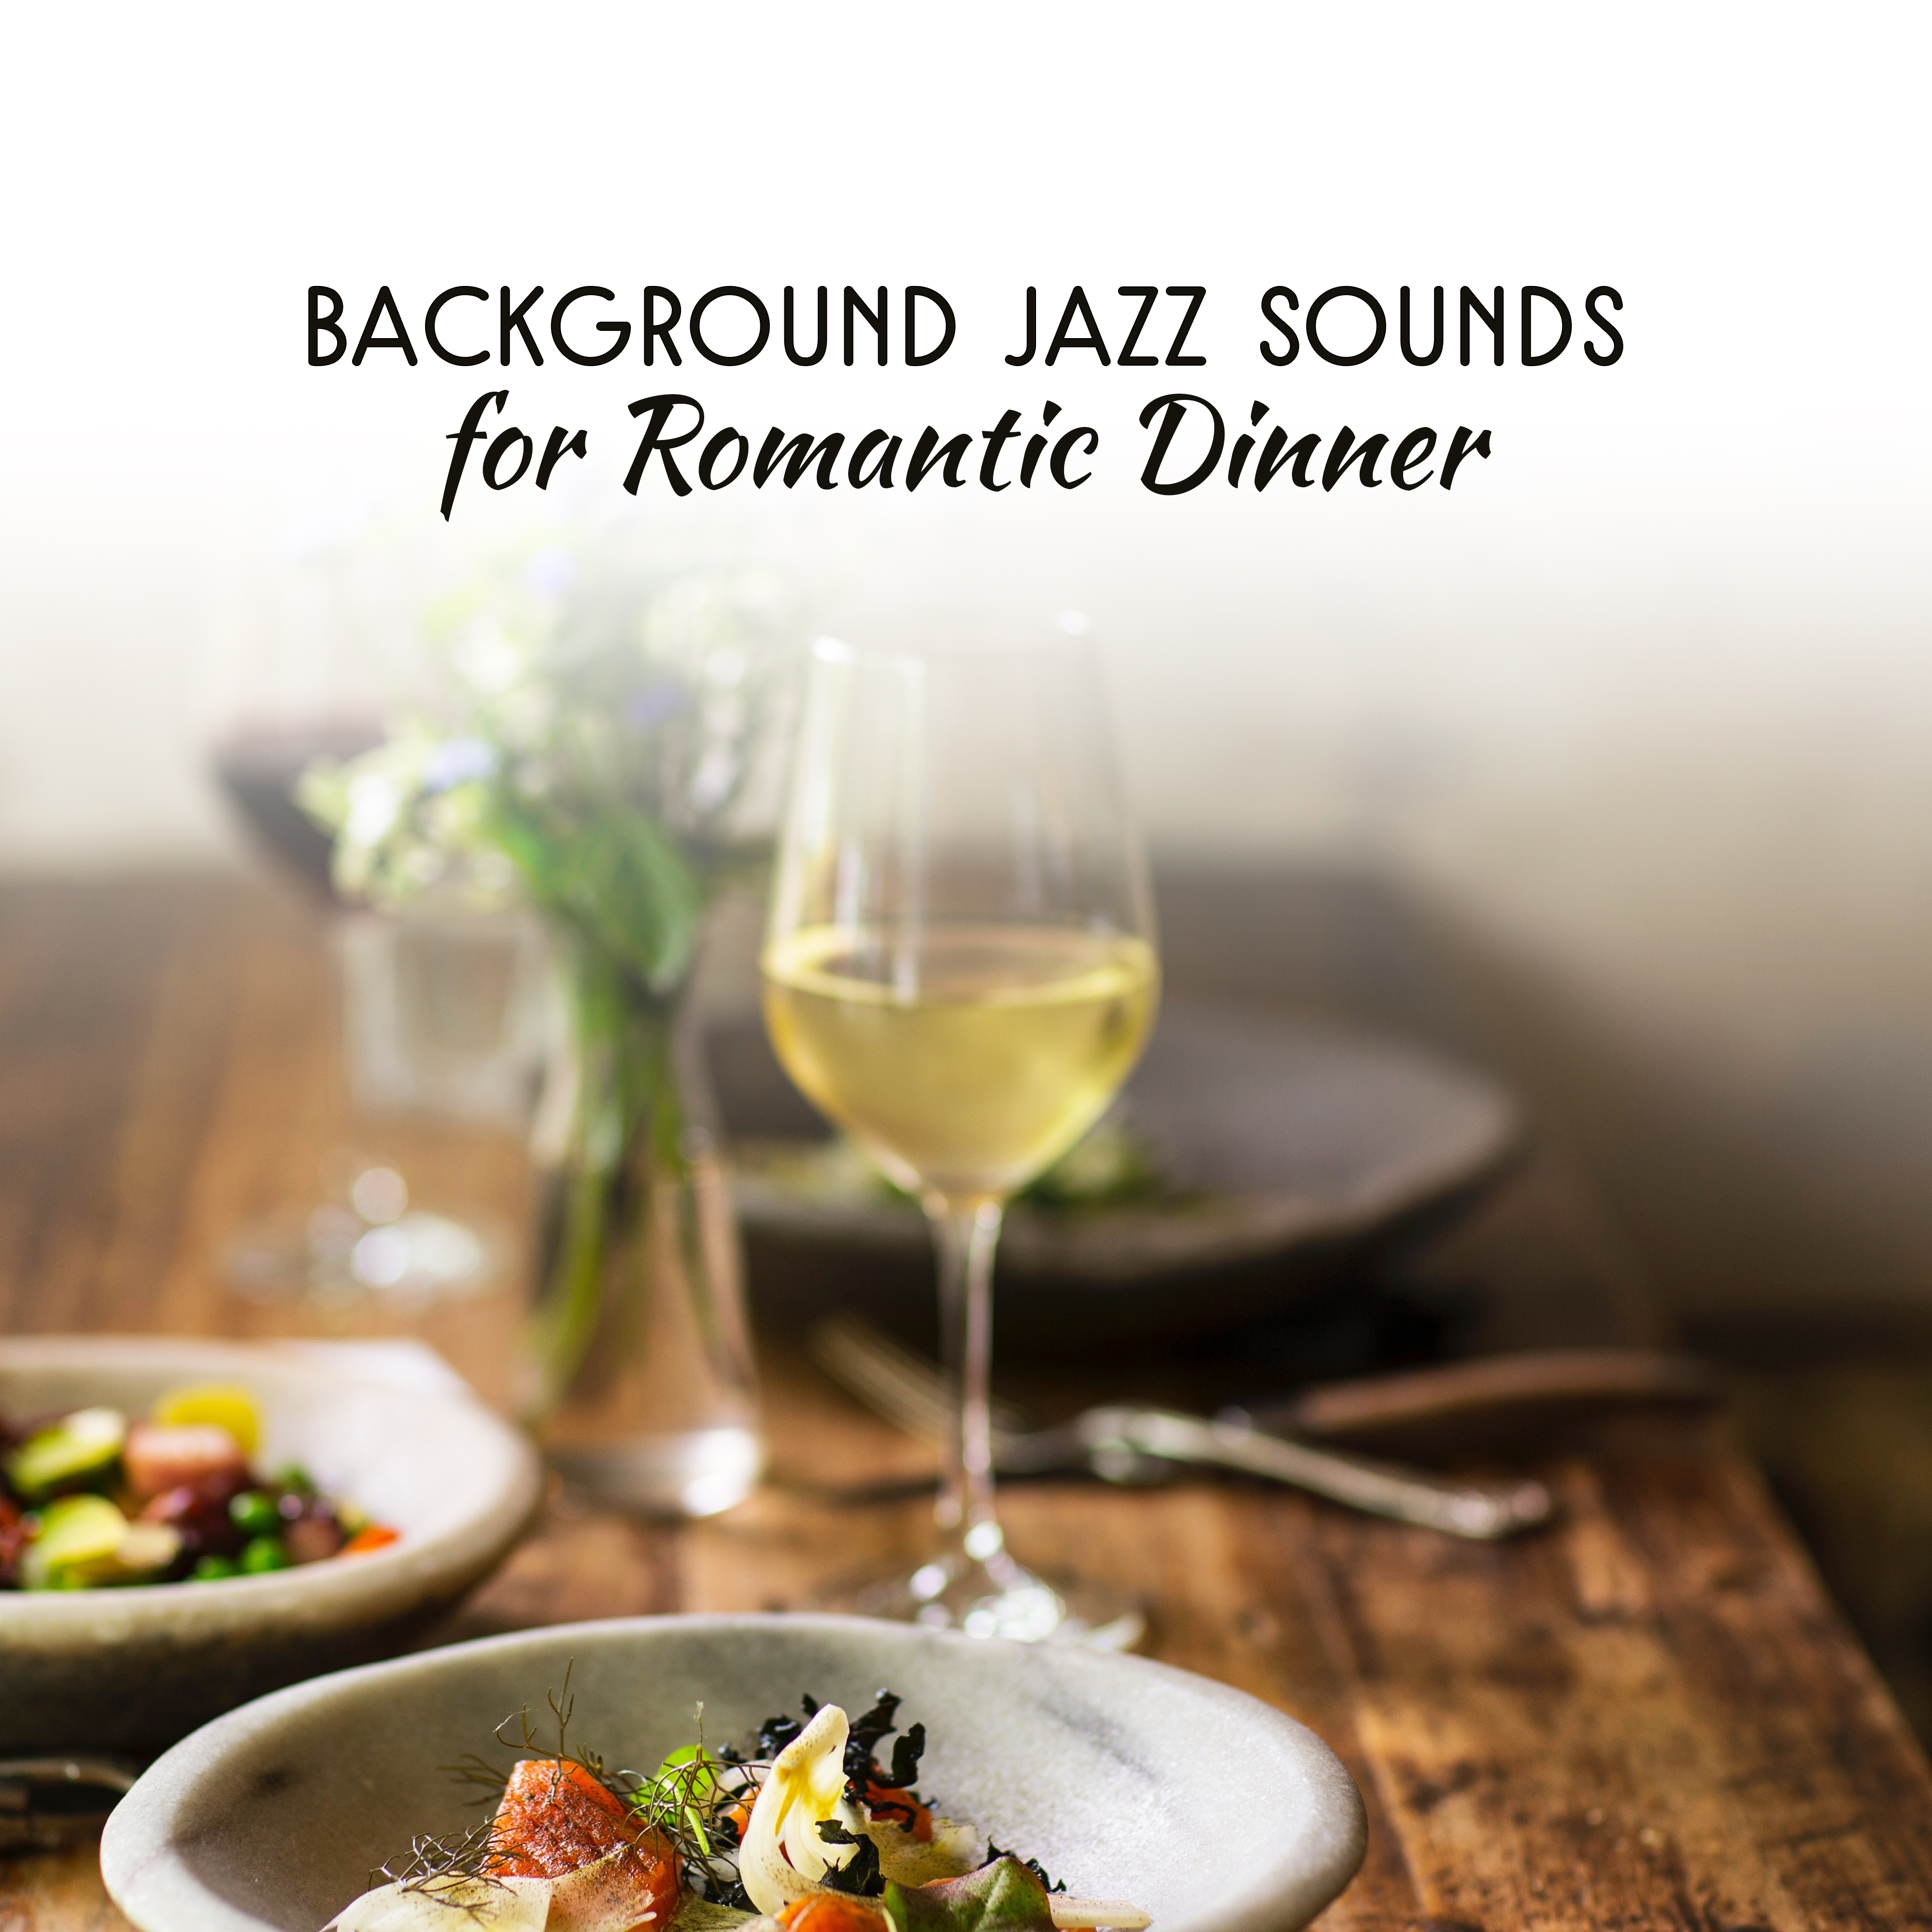 Background Jazz Sounds for Romantic Dinner  Peaceful Sounds for Lovers, Romantic Jazz Music, Jazz for Candle Light Dinner